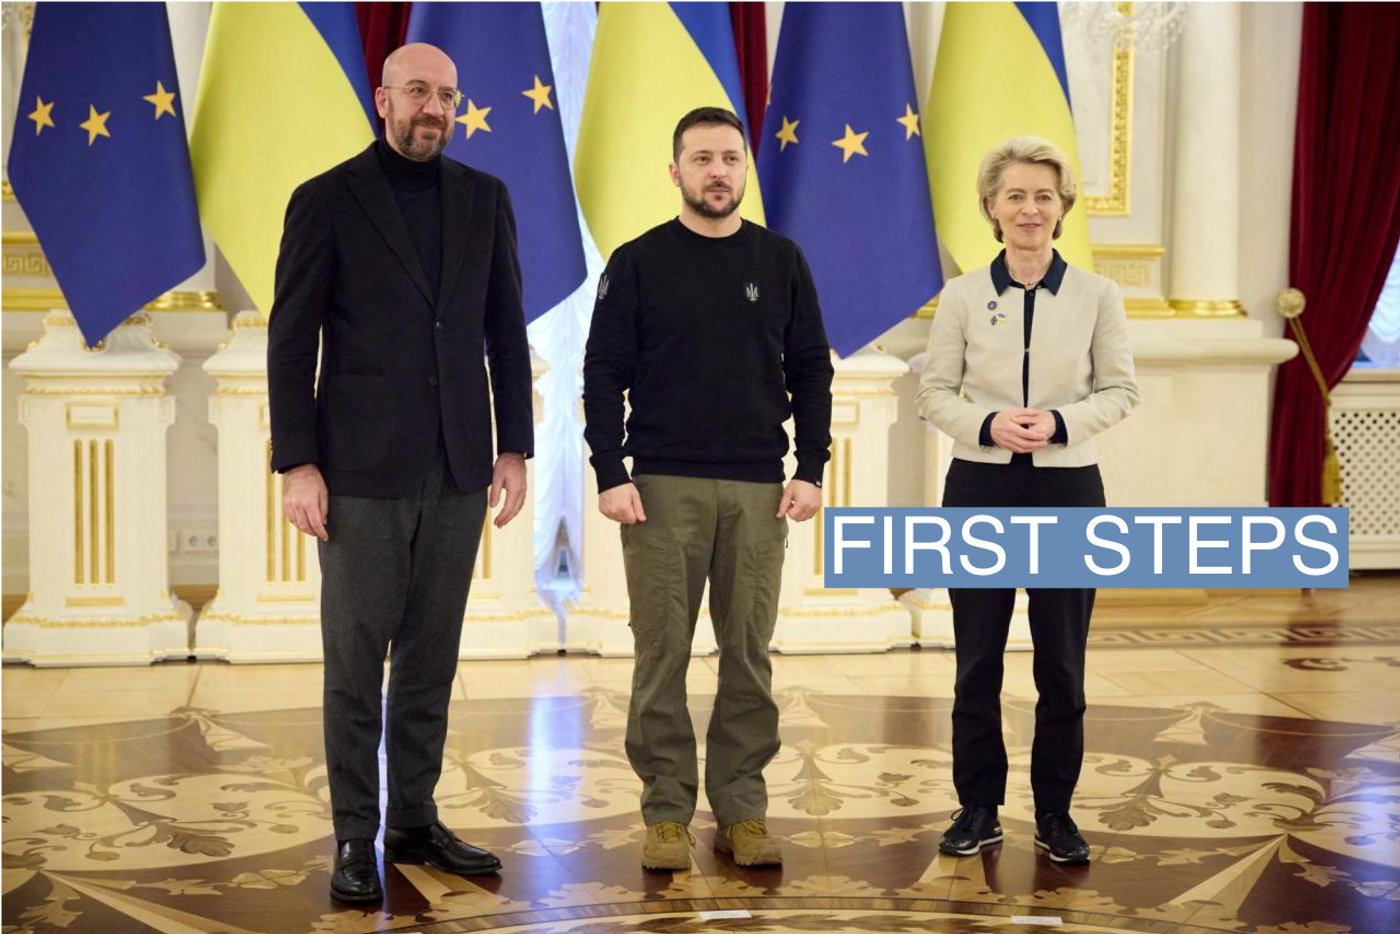 Ukraine's President Volodymyr Zelenskyy, European Commission President Ursula von der Leyen and European Council President Charles Michel pose for a picture during a European Union (EU) summit, as Russia's attack on Ukraine continues, in Kyiv, Ukraine February 3, 2023. Ukrainian Presidential Press Service/Handout via REUTERS